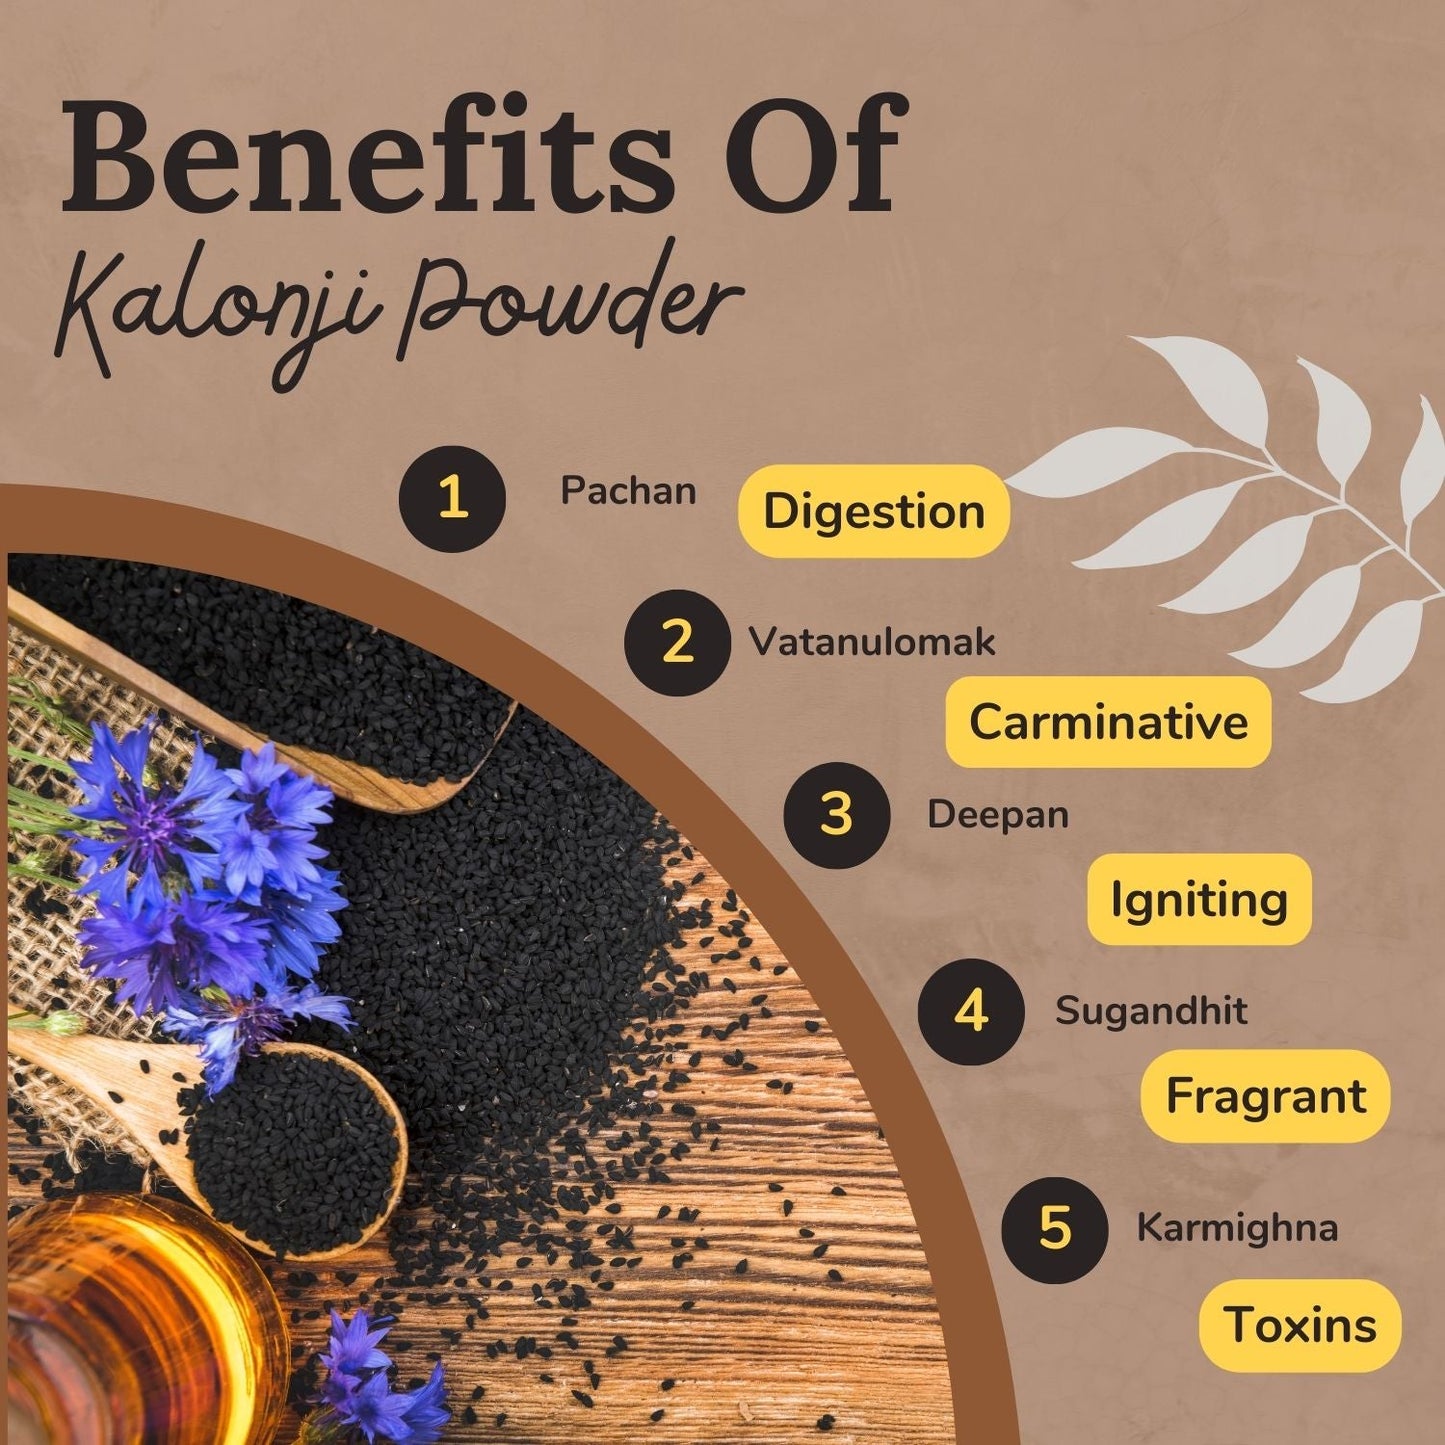 Songara Kalonji Powder: (Nigella sativa) for Health, Hair Growth, Managing Sugar Level, Skin Health, Organically Processed, Premium Natural, (Indian Superfood, Add flavour to curries, Indian Breads and Baked Goods, (100G, Pouch)